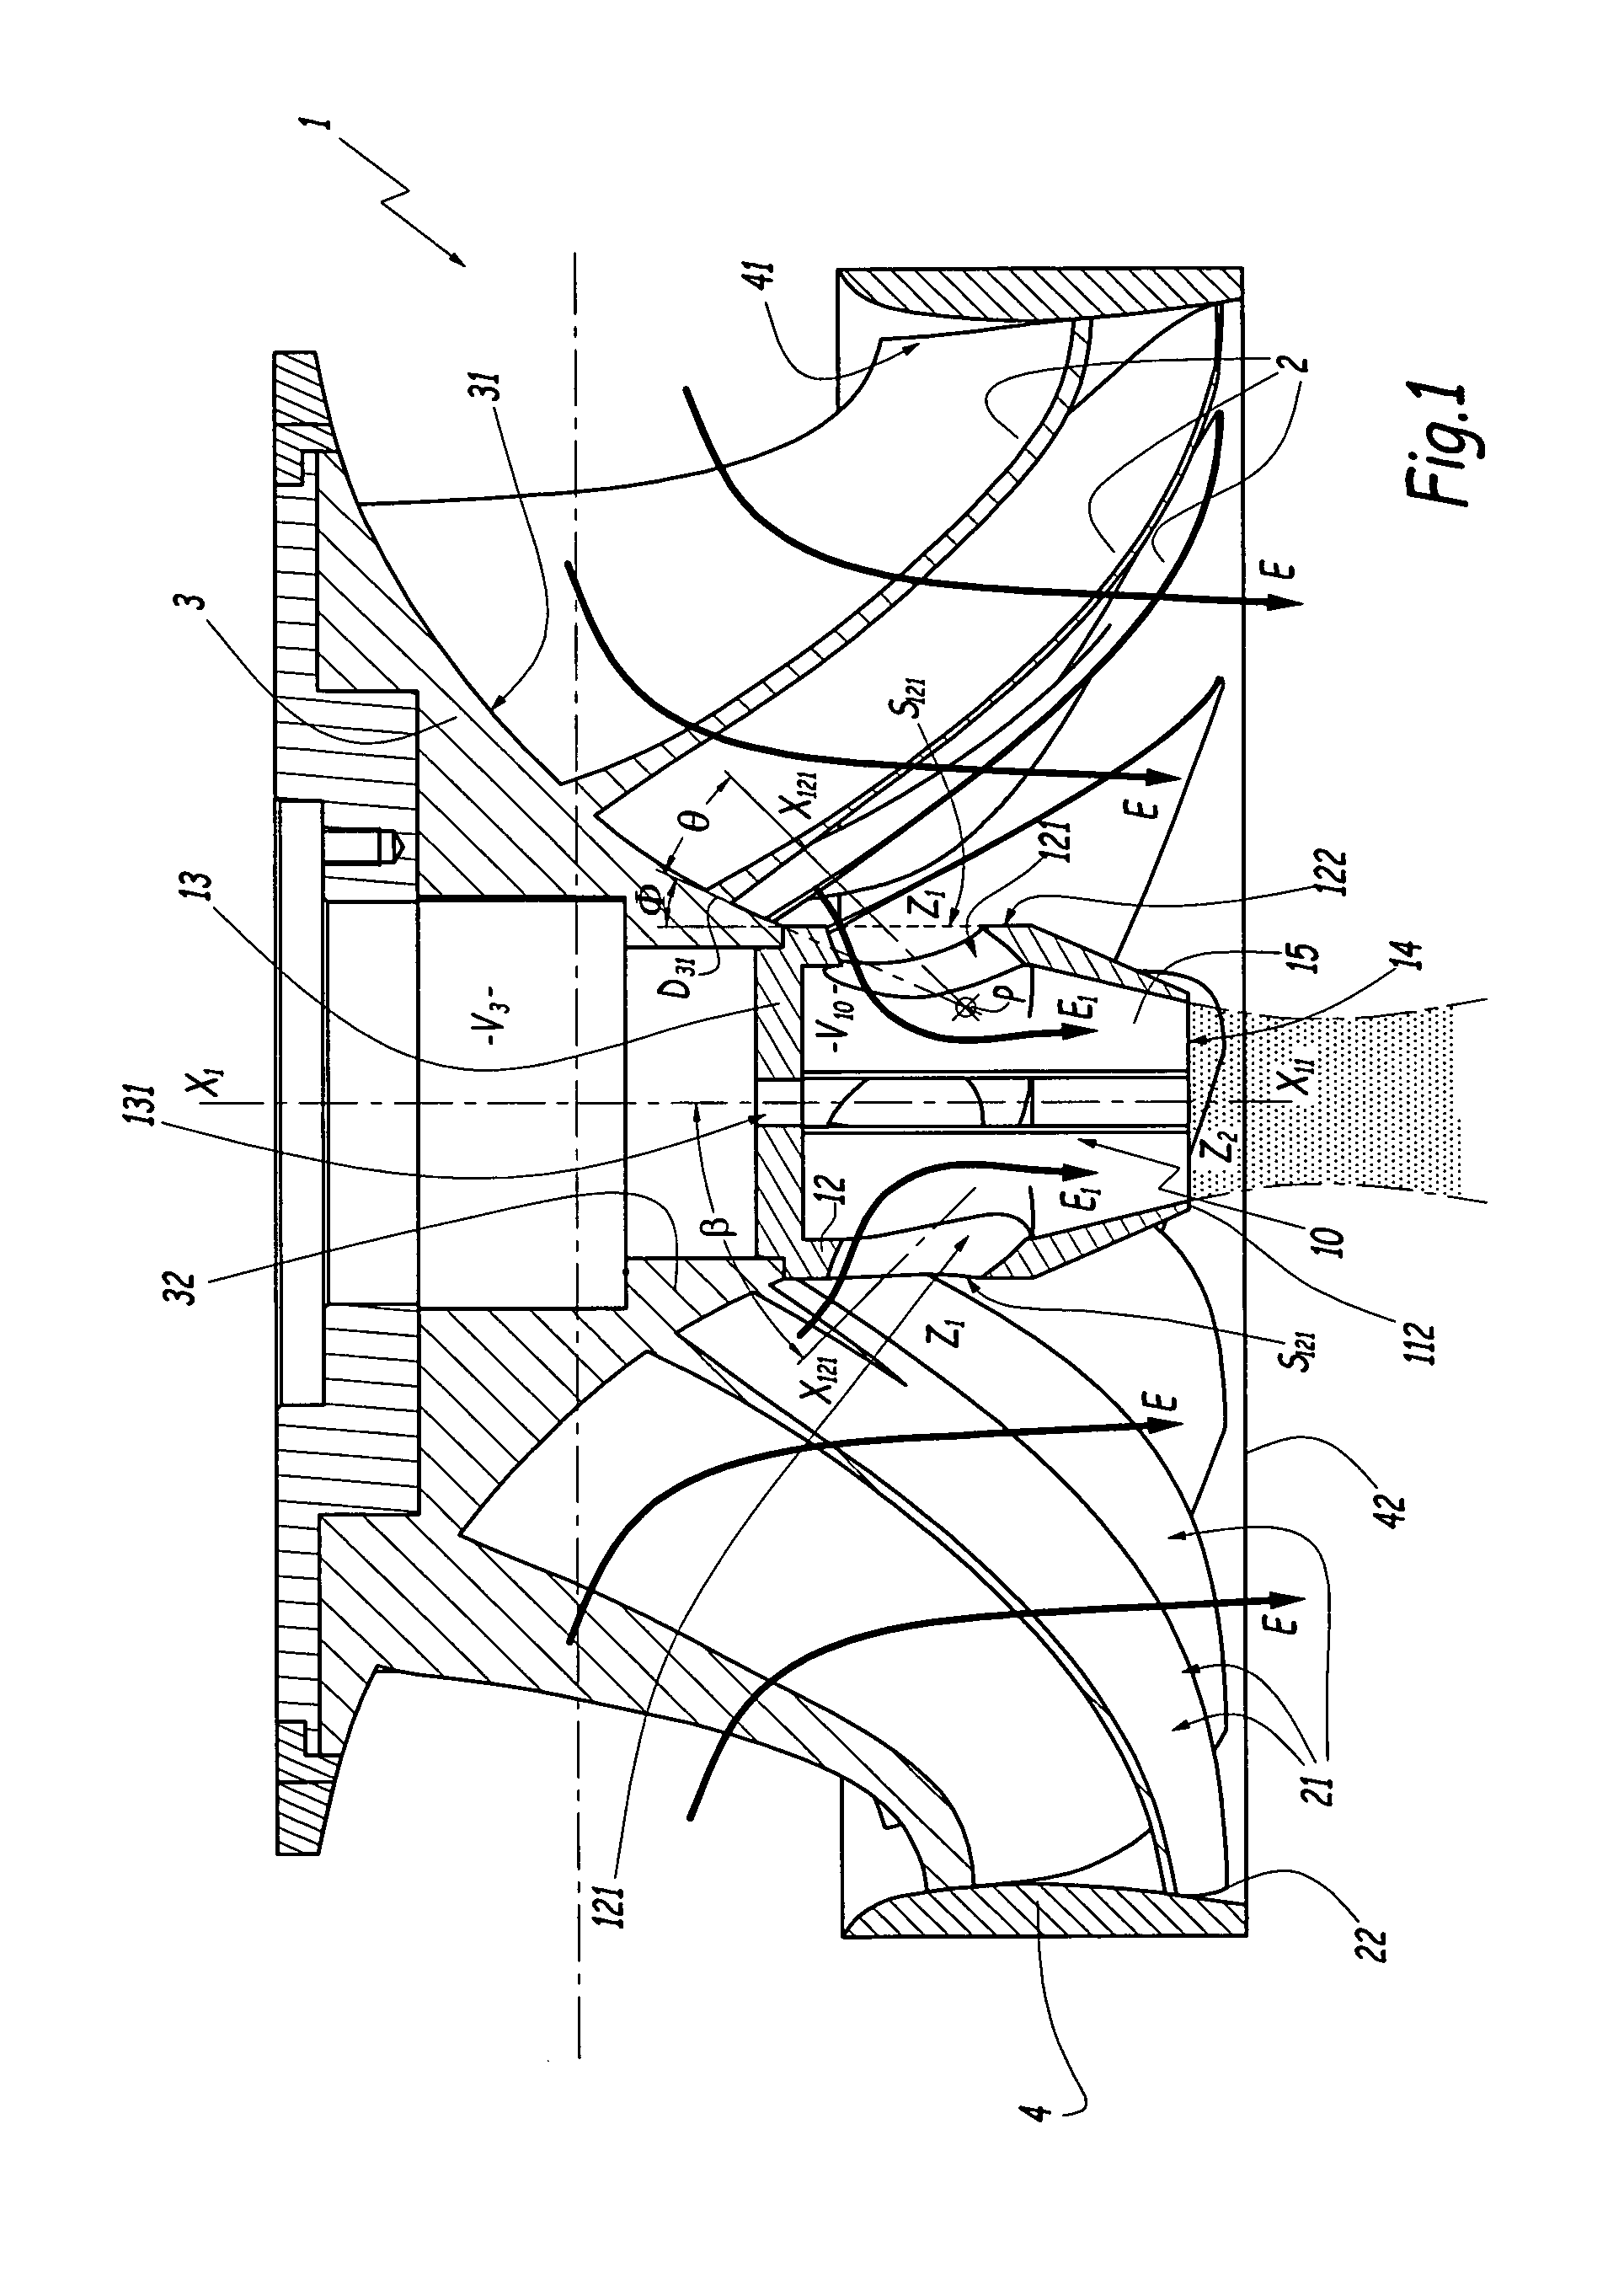 Francis-type hydraulic turbine wheel equipped with a tip-forming member, and method of reducing fluctuations using such a wheel